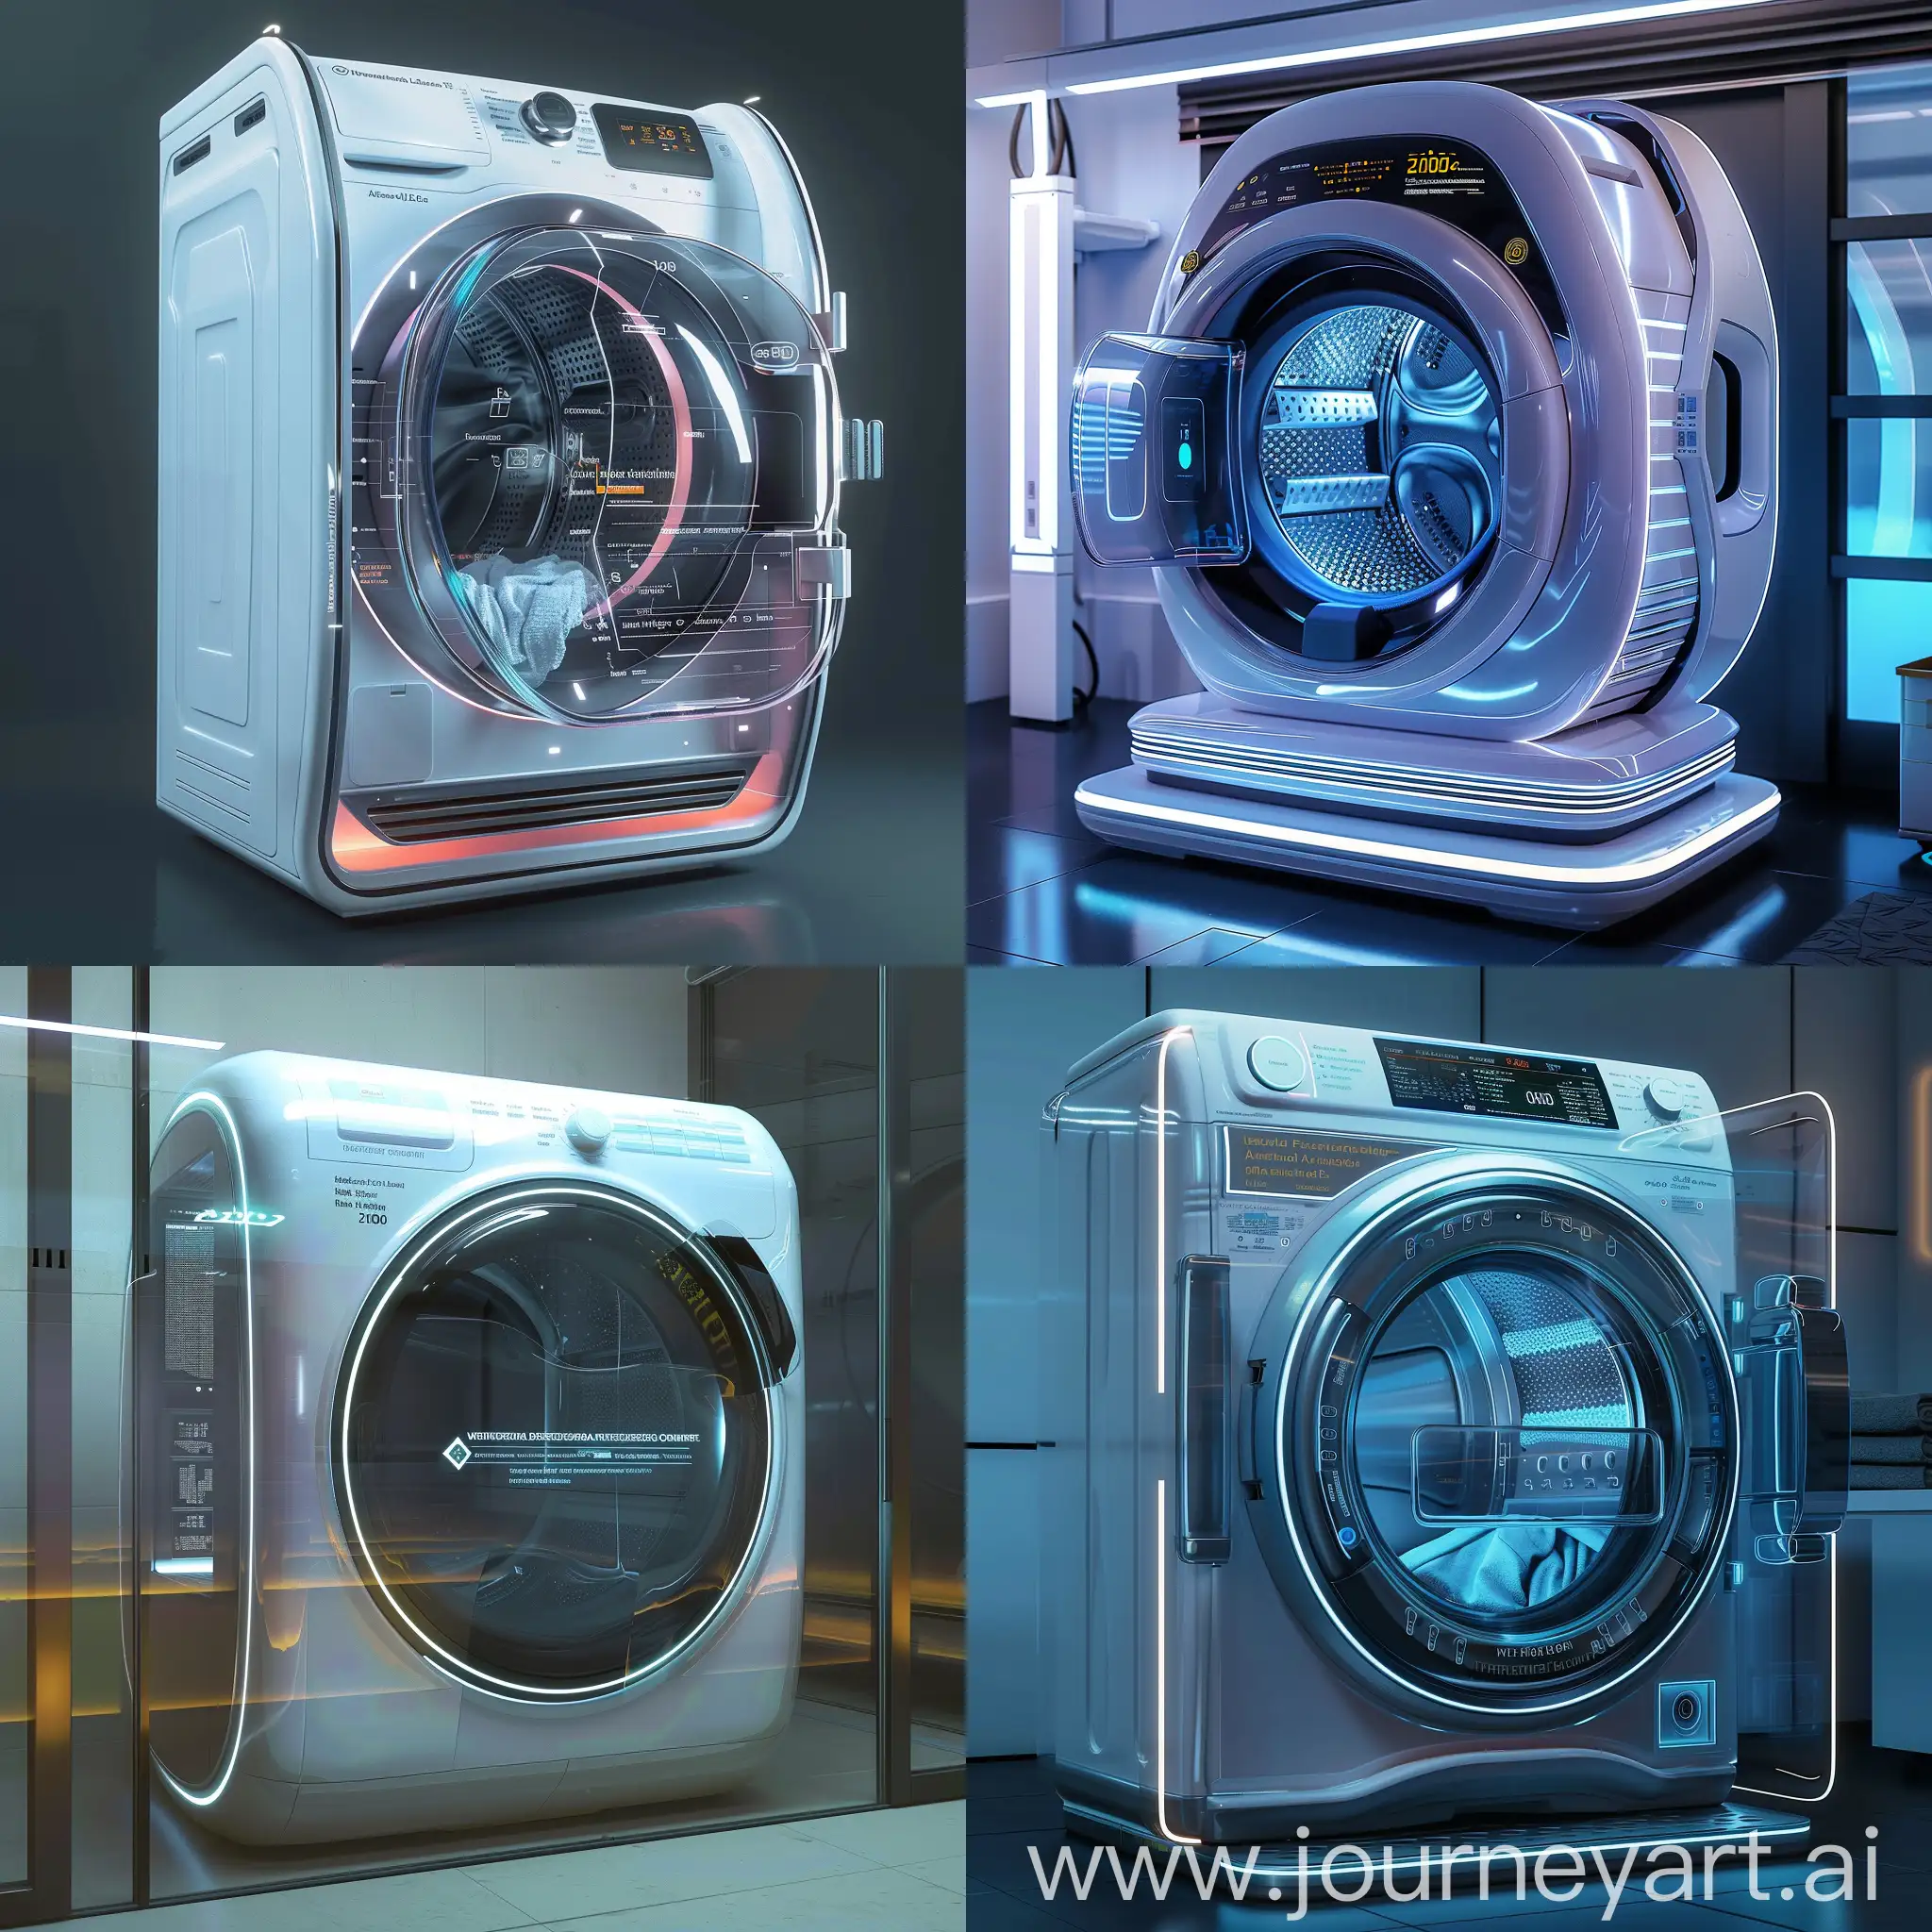 Futuristic-Washing-Machine-with-Advanced-Water-Recycling-System-and-AIPowered-Smart-Sensors